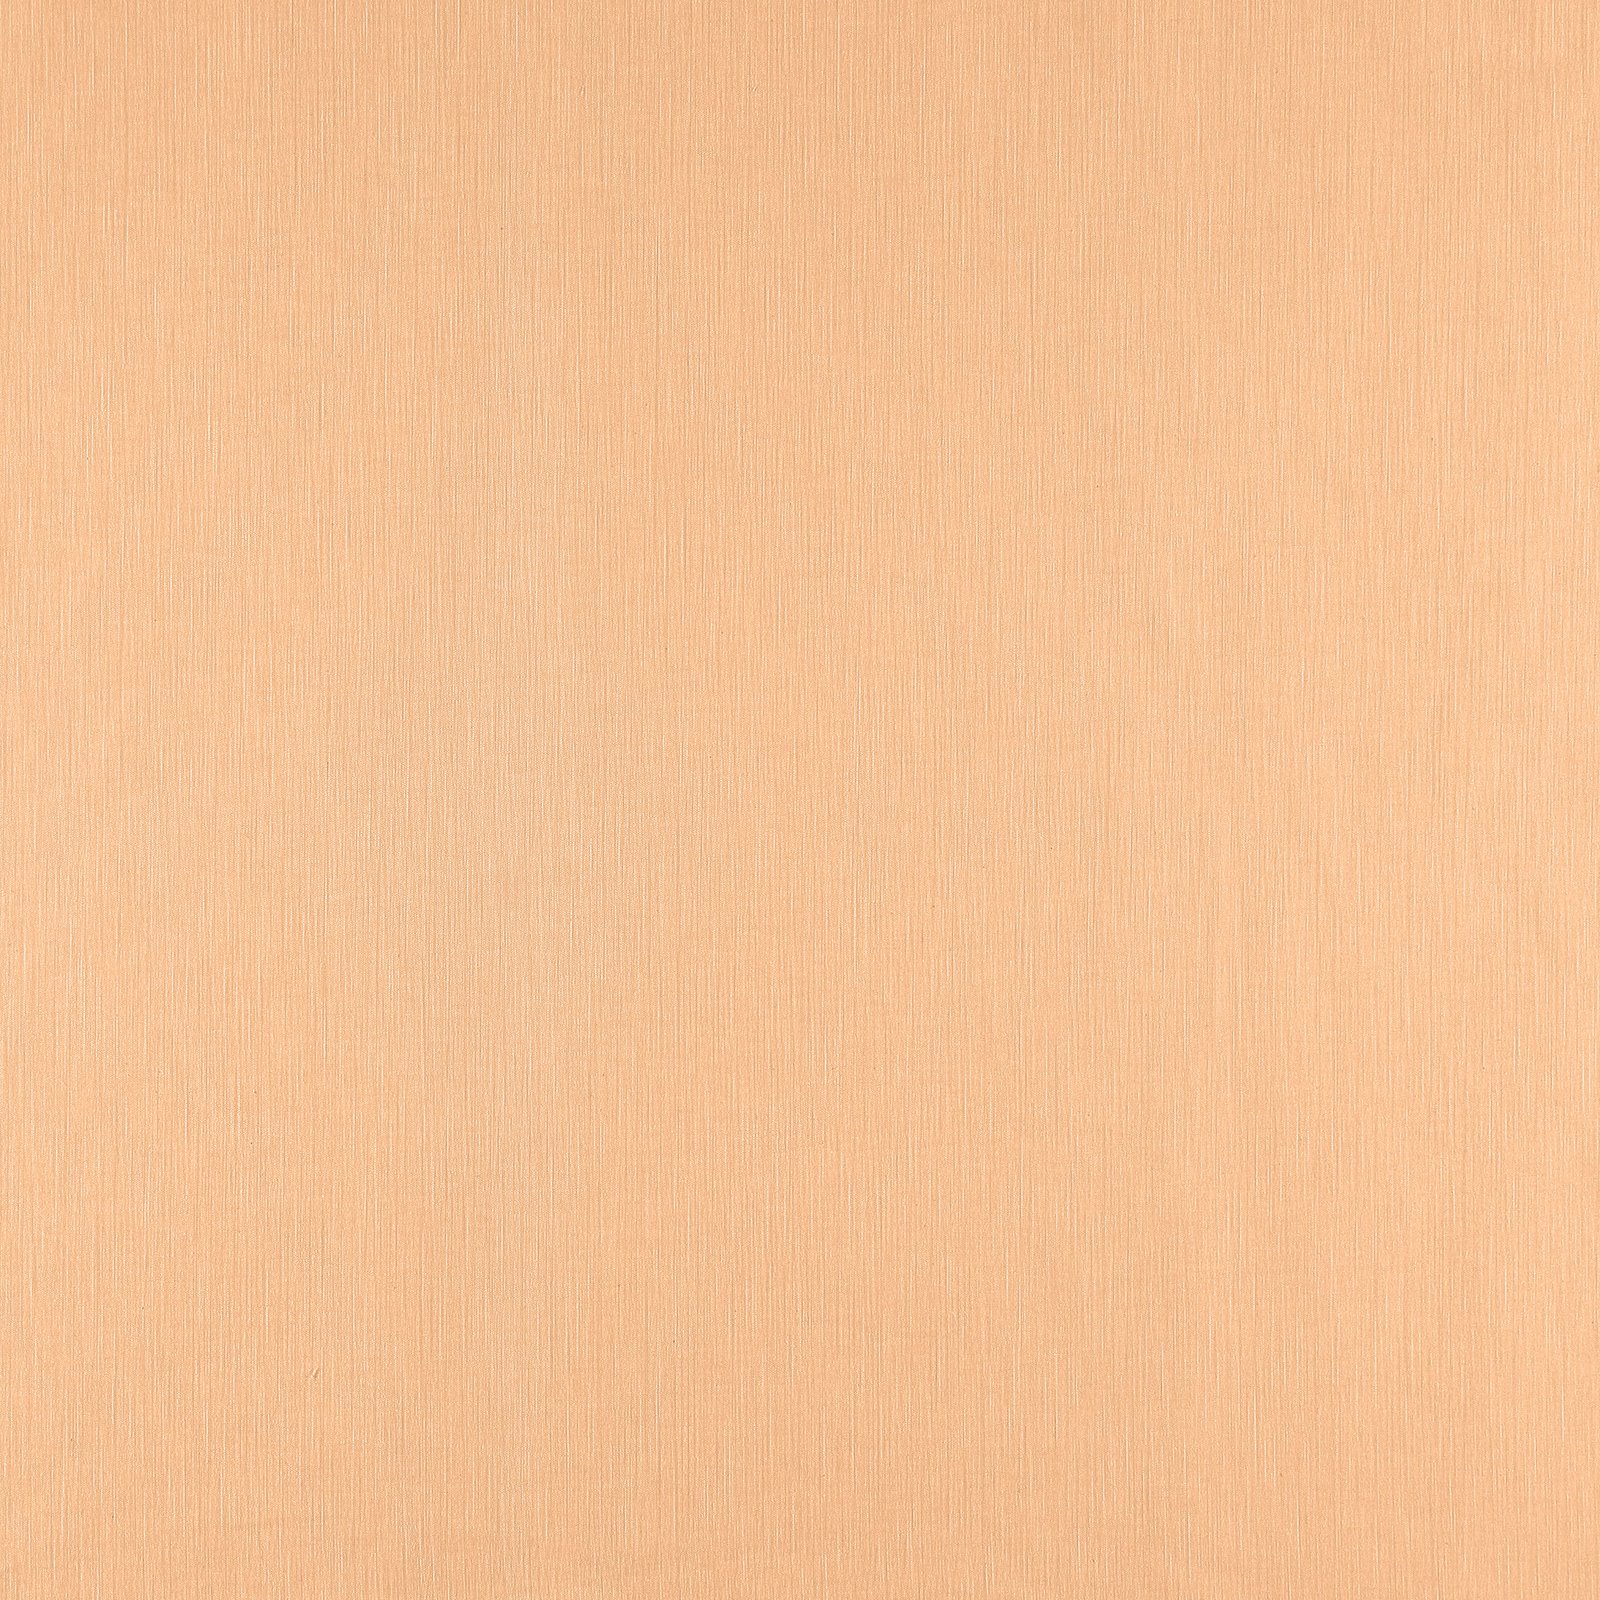 Voile light terracotta w texture 816282_pack_solid